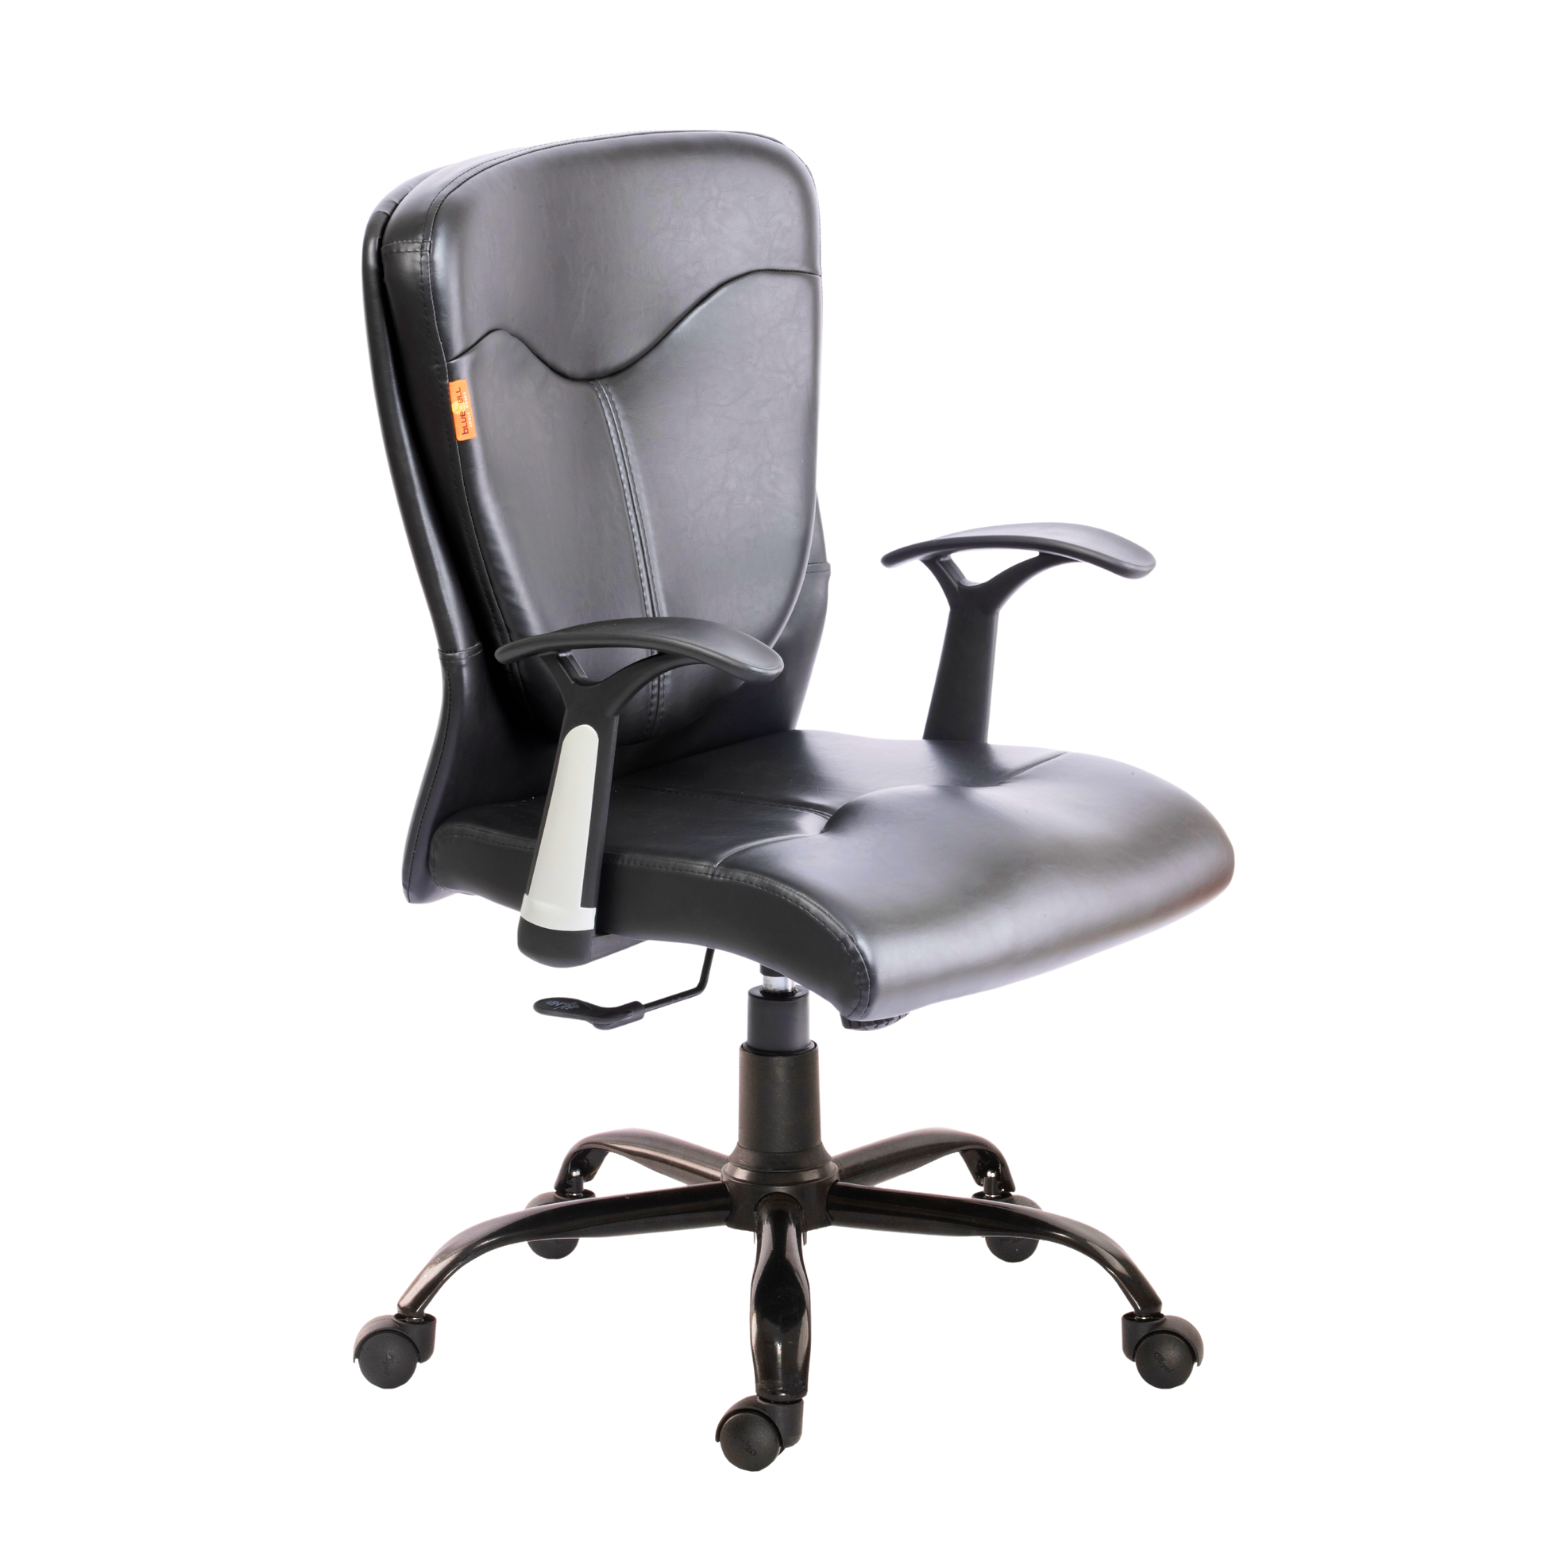 Proactive Med Back Revolving Chair (Eco) - Premium Workstation Chair for Office Staff